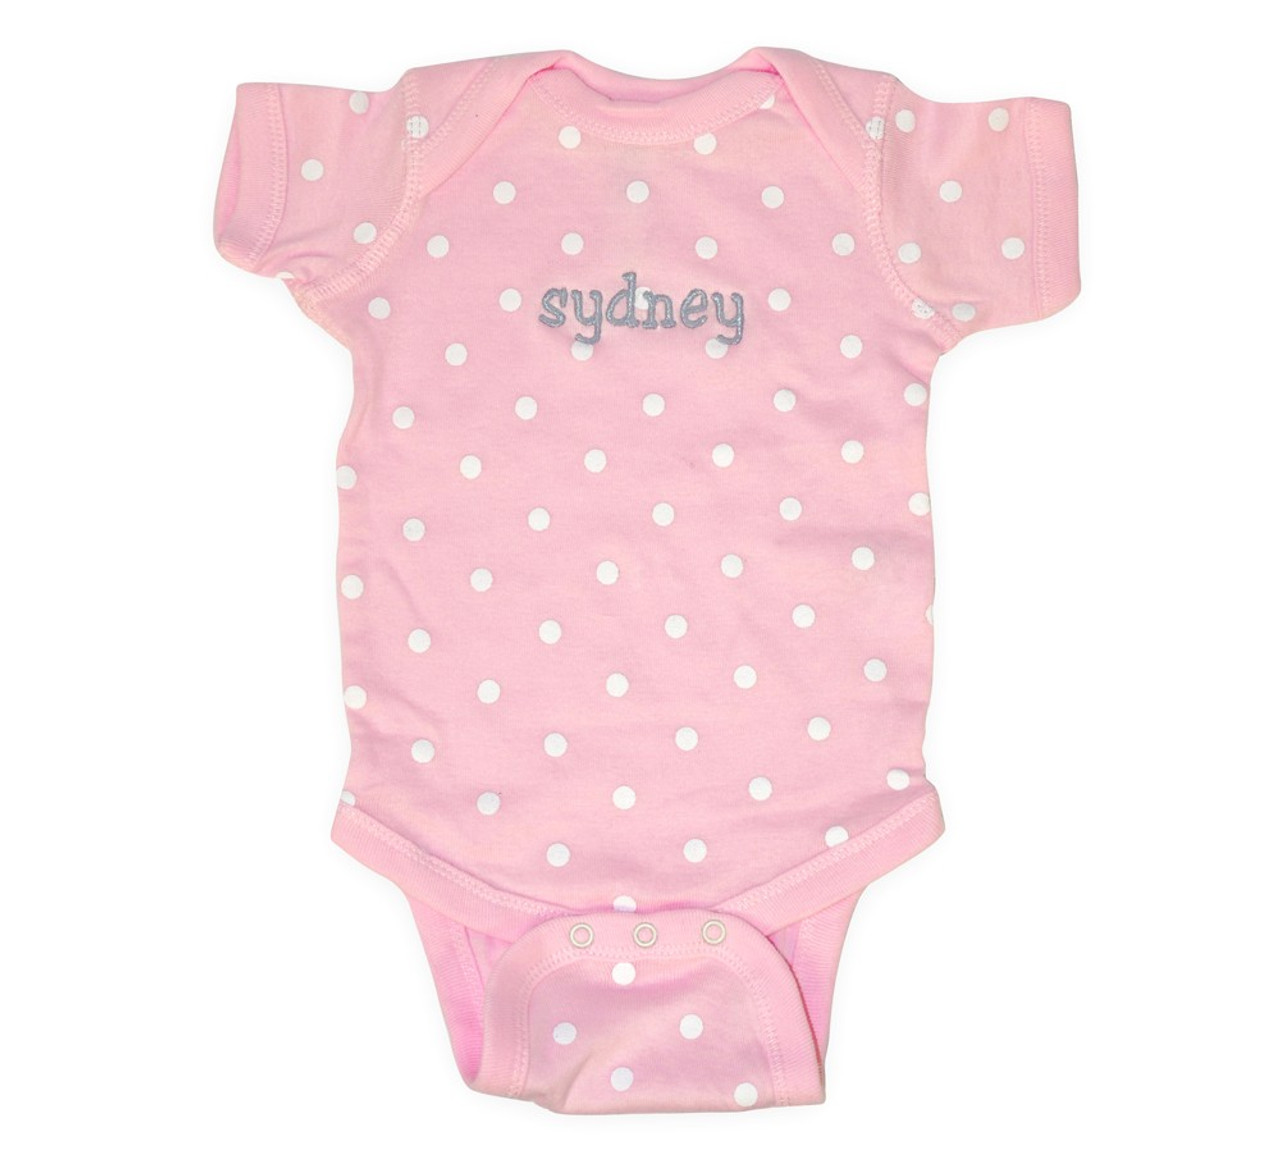 PERSONALIZED POLKA DOT ONESIE | Baby Be Hip